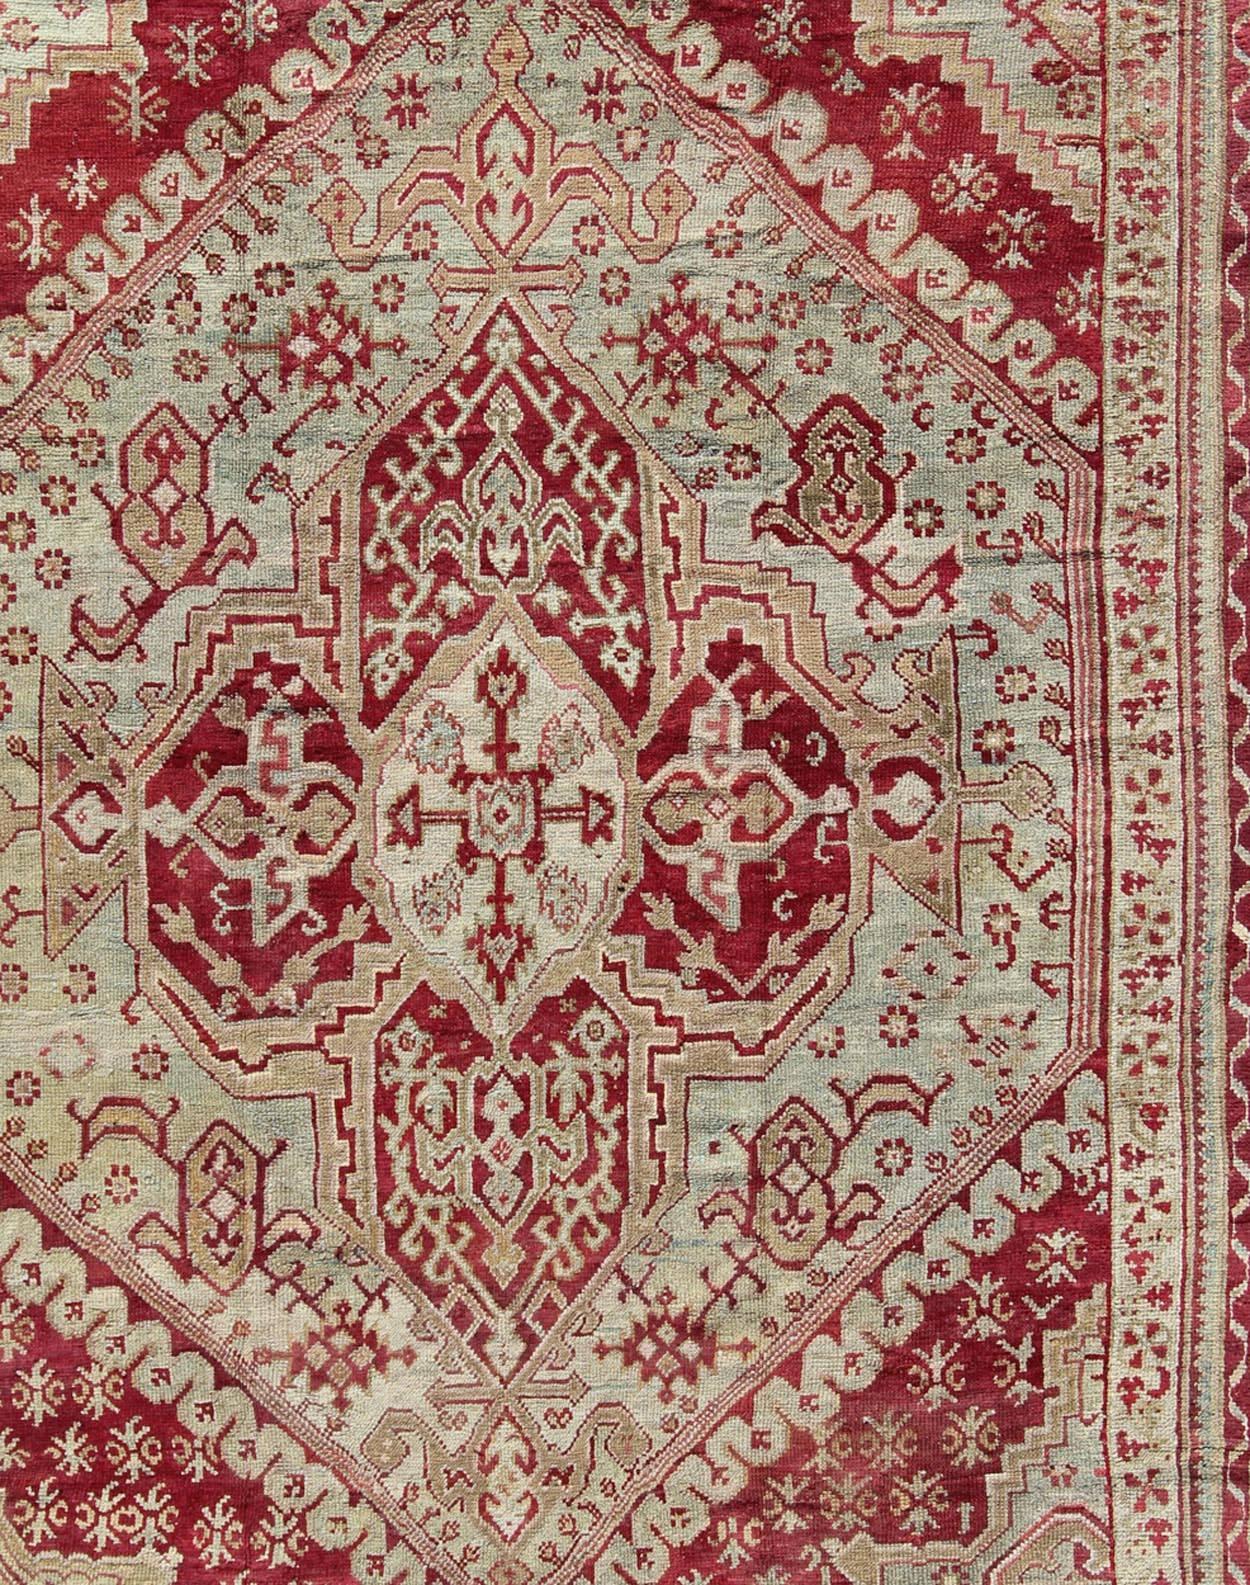 Hand-Knotted Antique Turkish Ghiordes 19th Century Rug in Raspberry Red, Ice Blue & L. Green For Sale